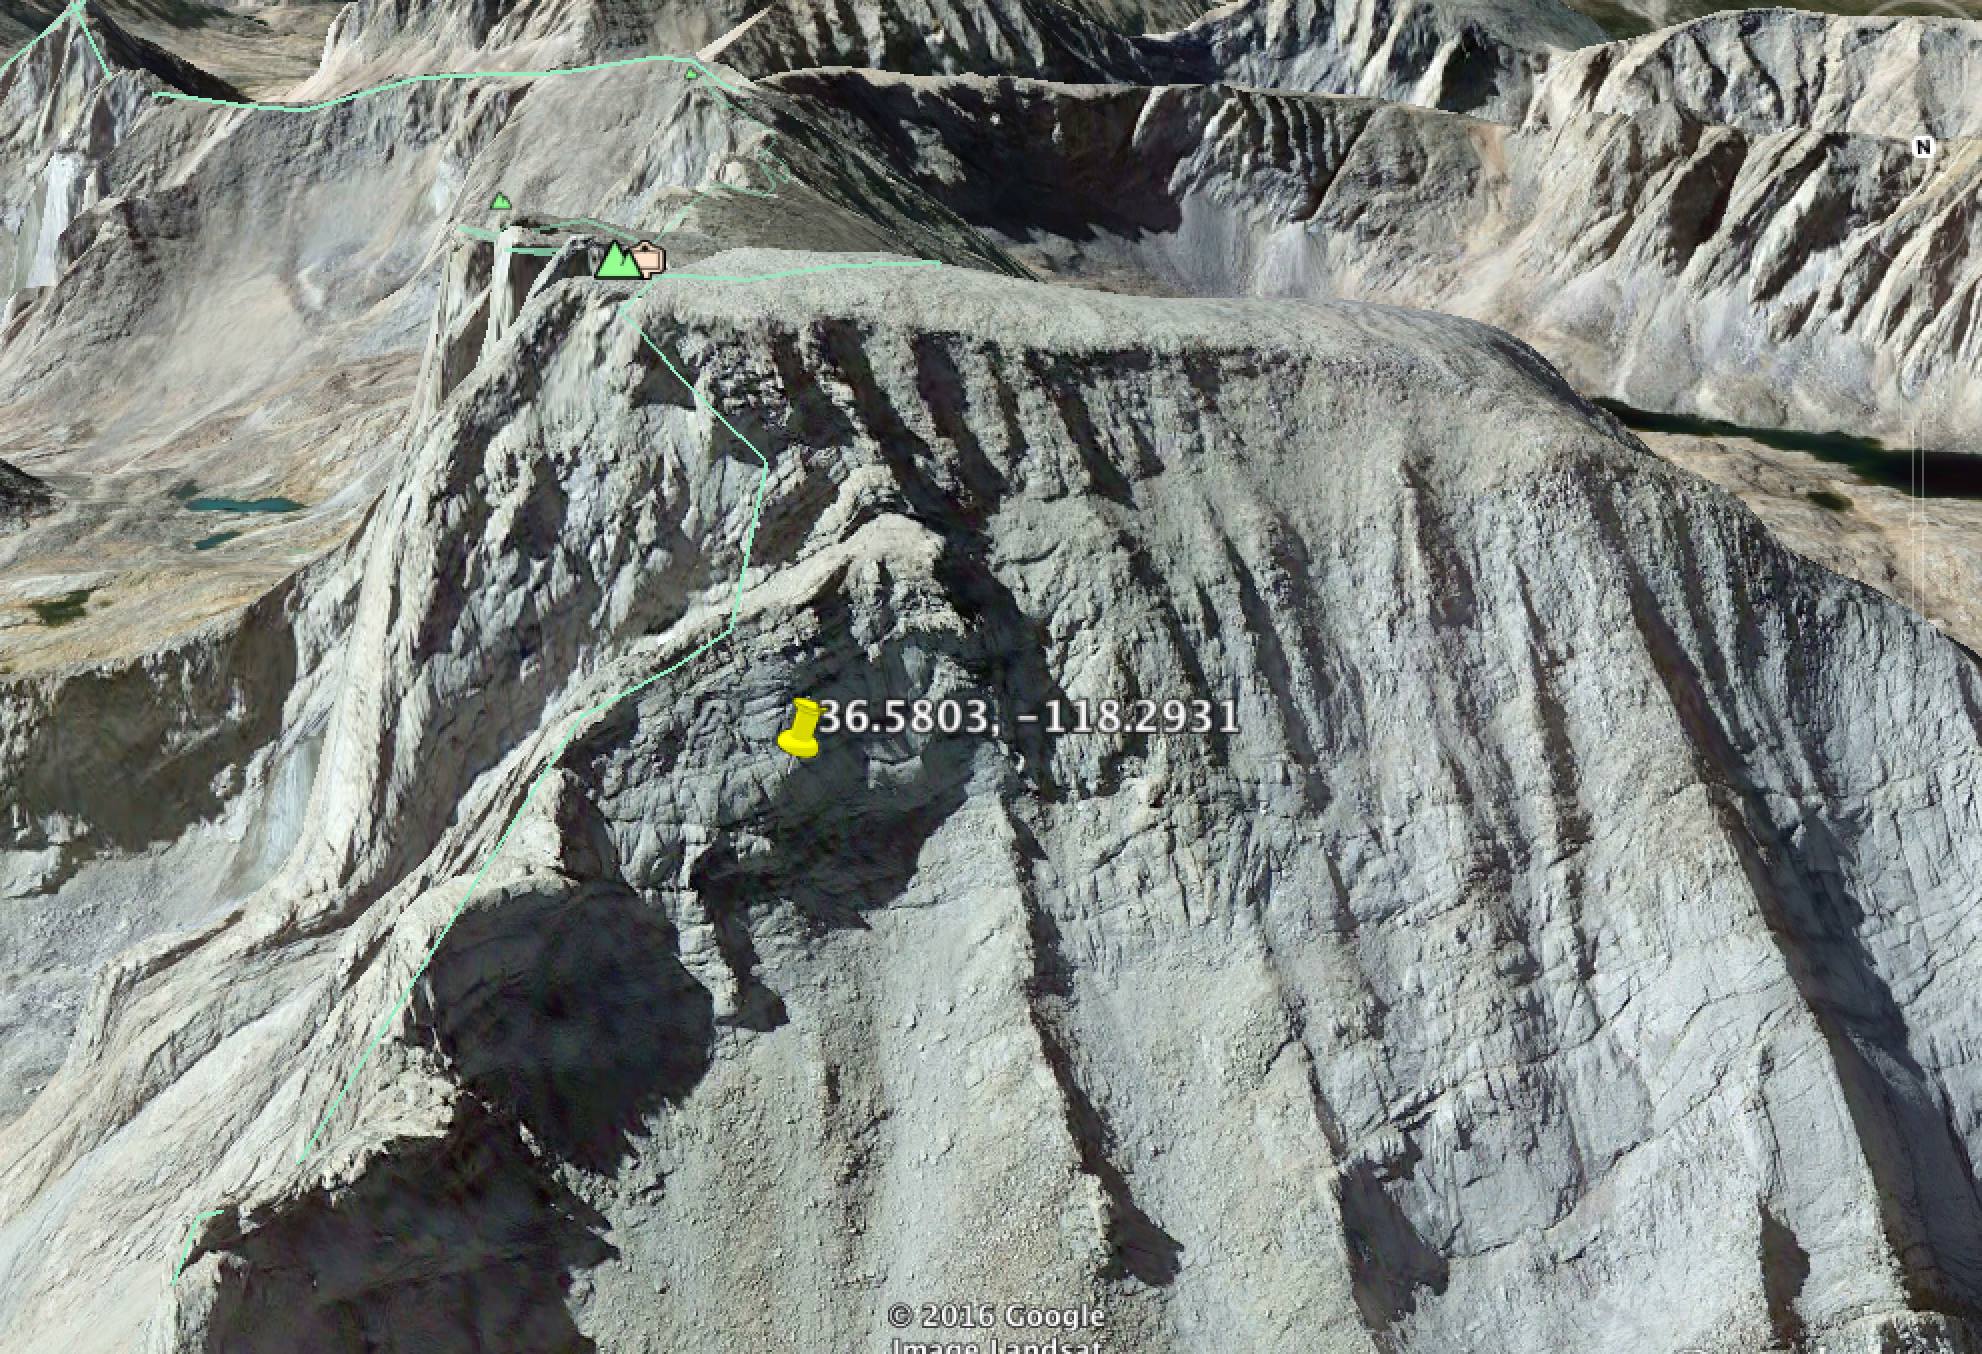 backpack location - green line is Mountaineer's Route. photo: inyo country sheriff's office